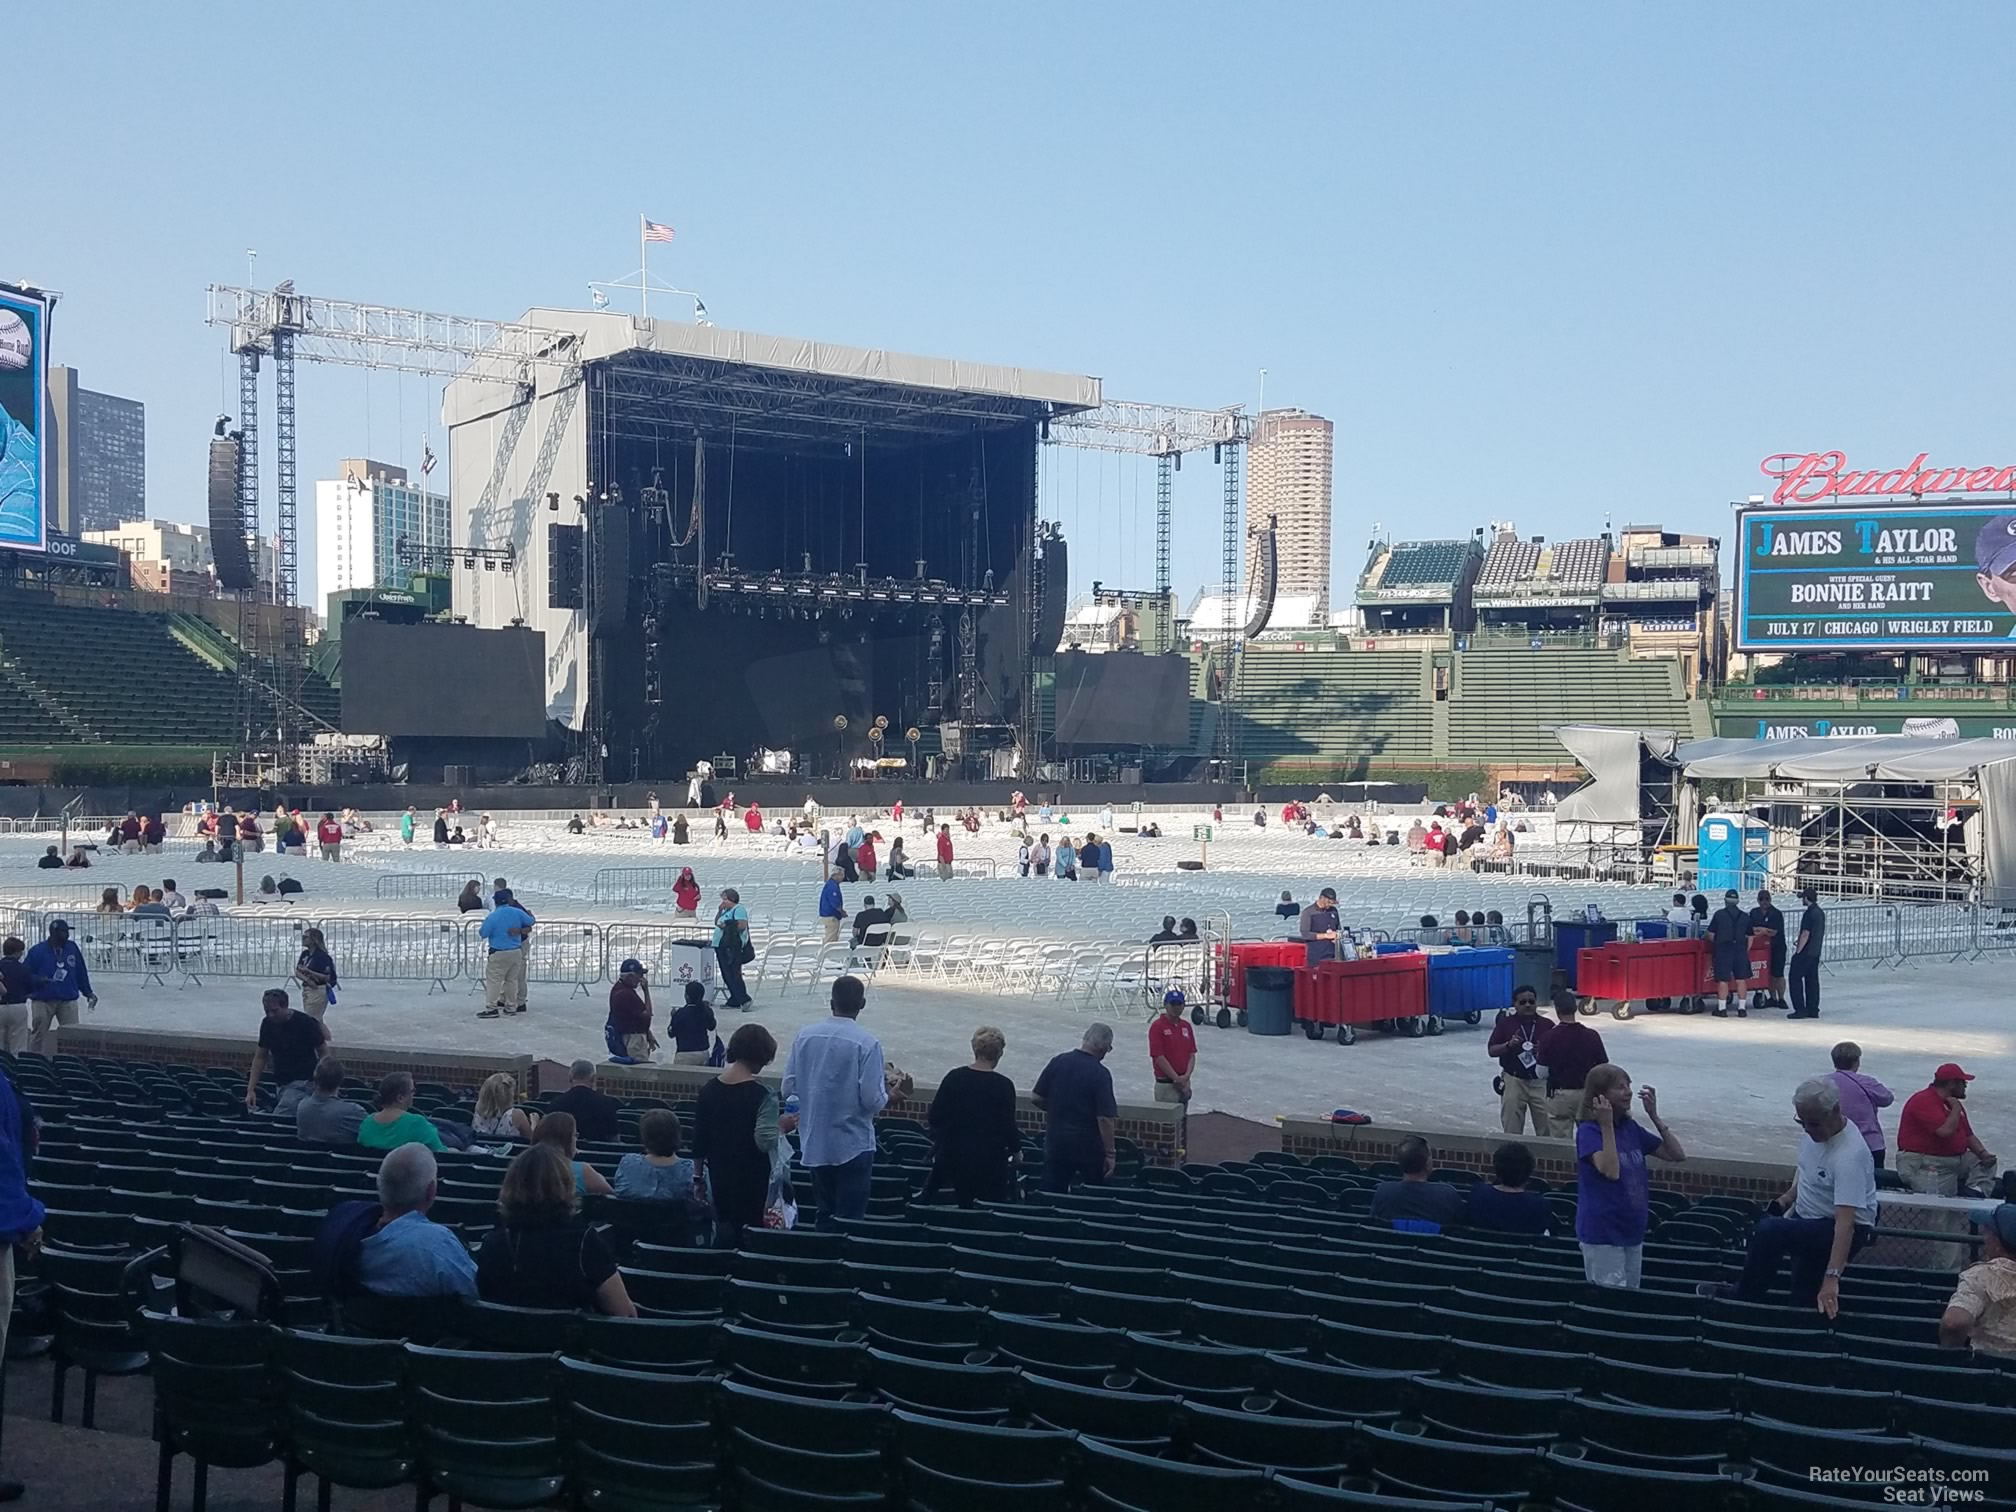 section 109, row 4 seat view  for concert - wrigley field